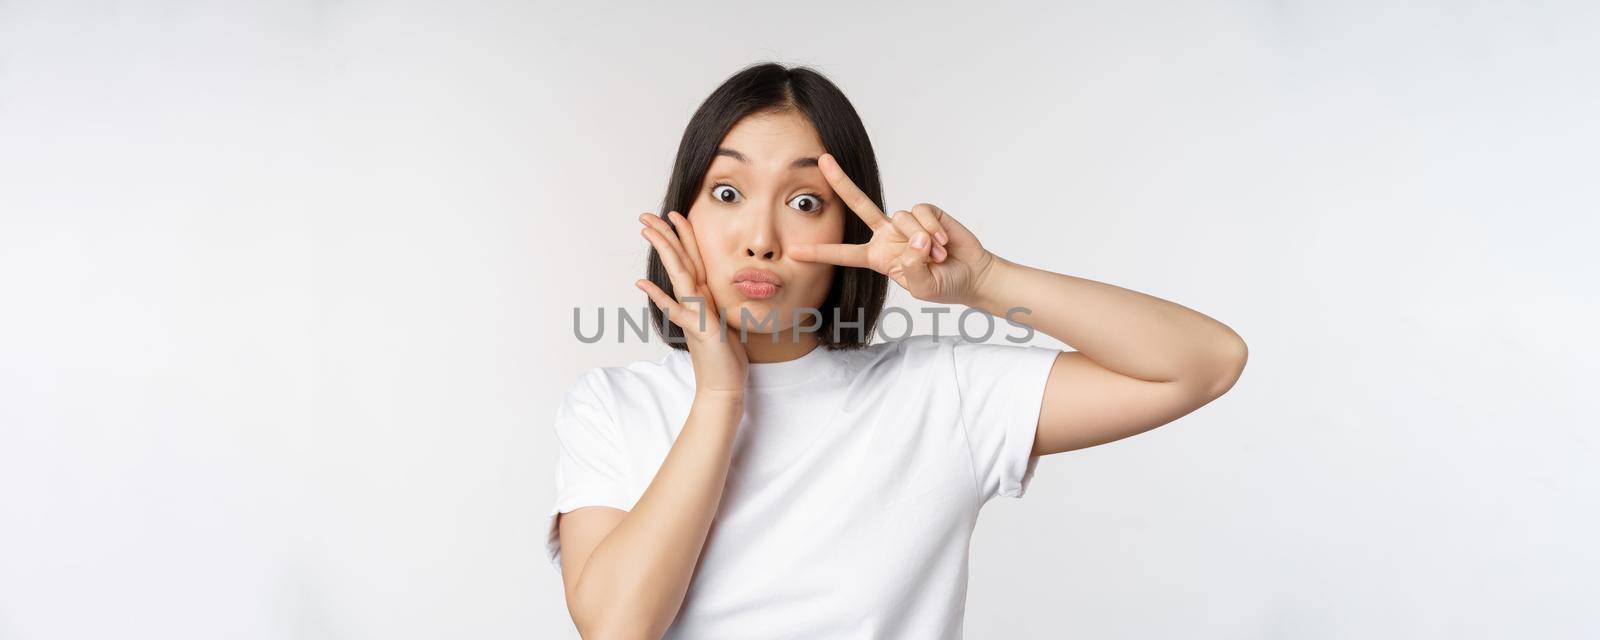 Cute asian girl posing with kawaii v-sign, peace gesture near face, standing in tshirt over white background. Copy space